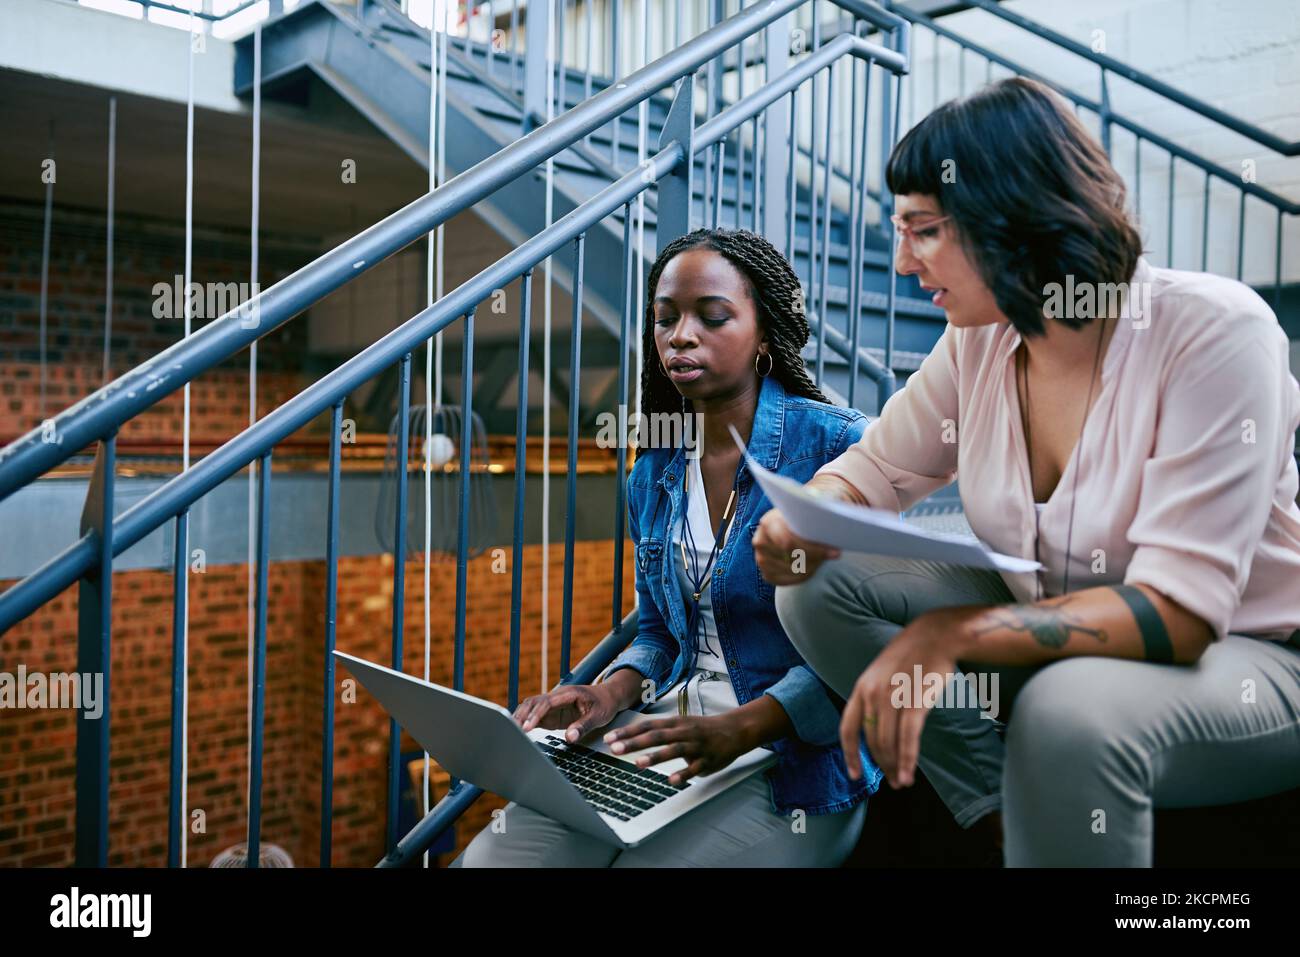 Submitting their project online. two colleagues collaborating in a modern office. Stock Photo